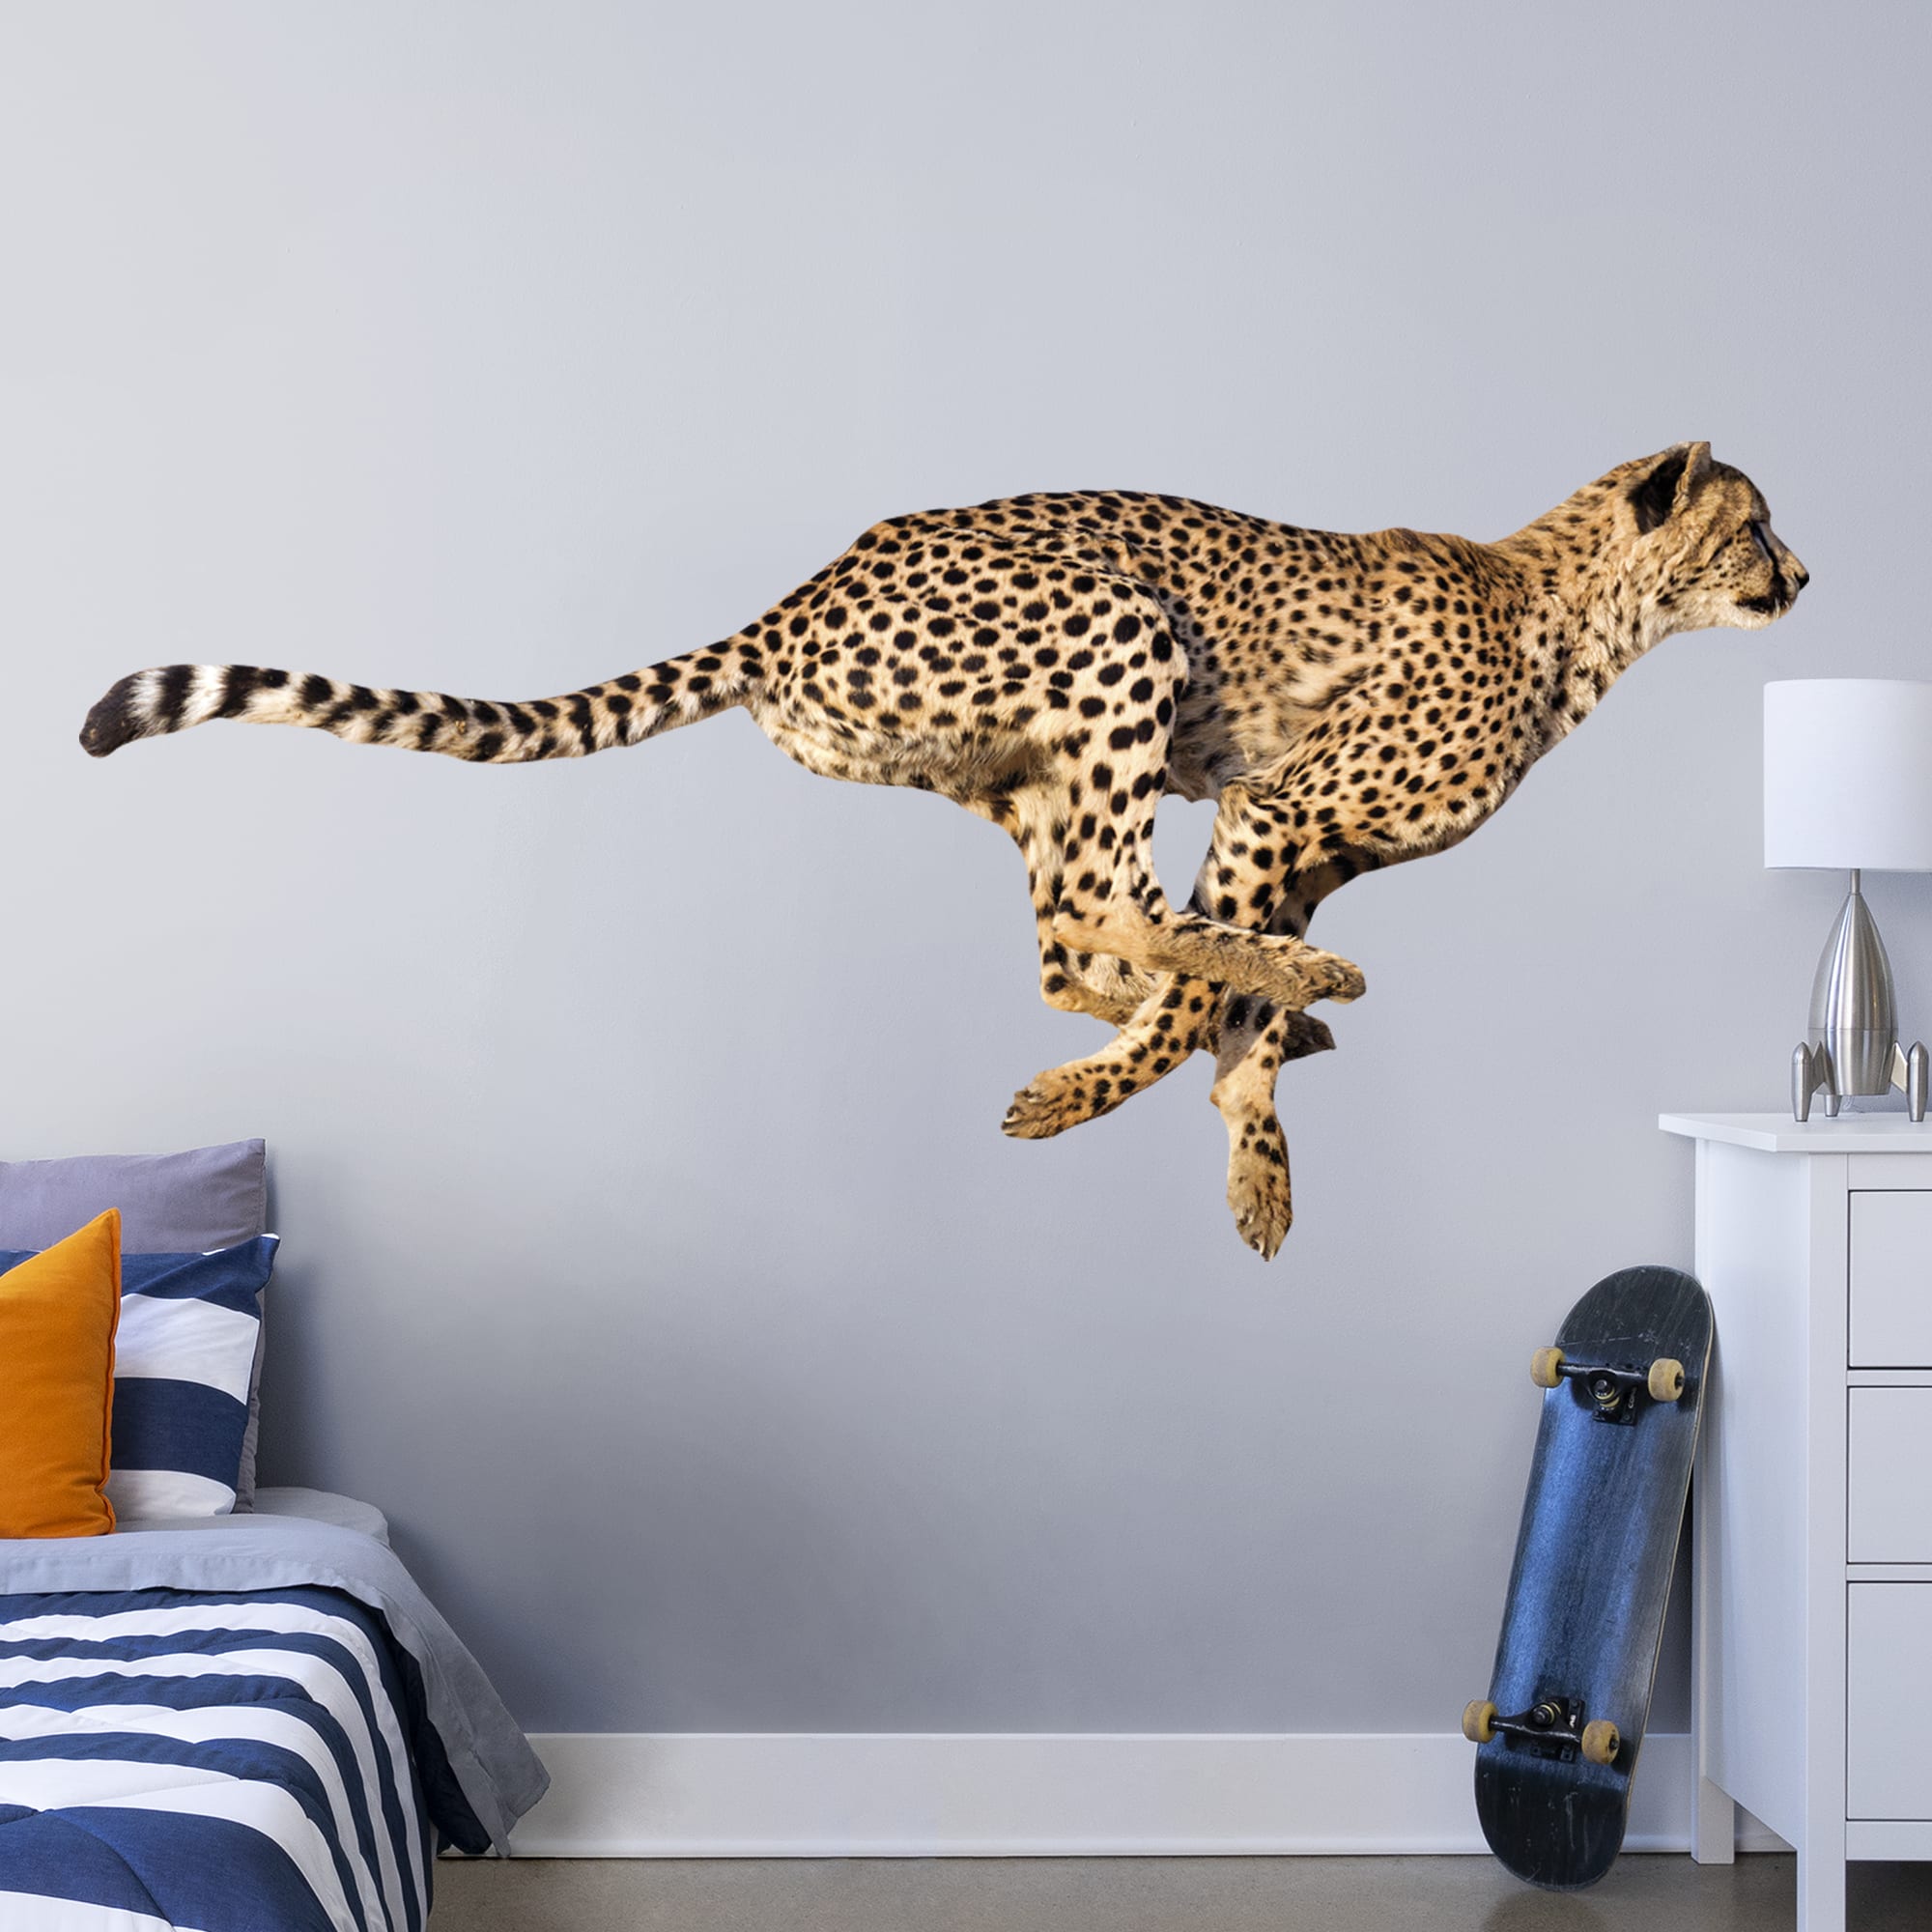 Cheetah - Removable Vinyl Decal Life-Size Animal + 14 Decals (89"W x 42"H) by Fathead